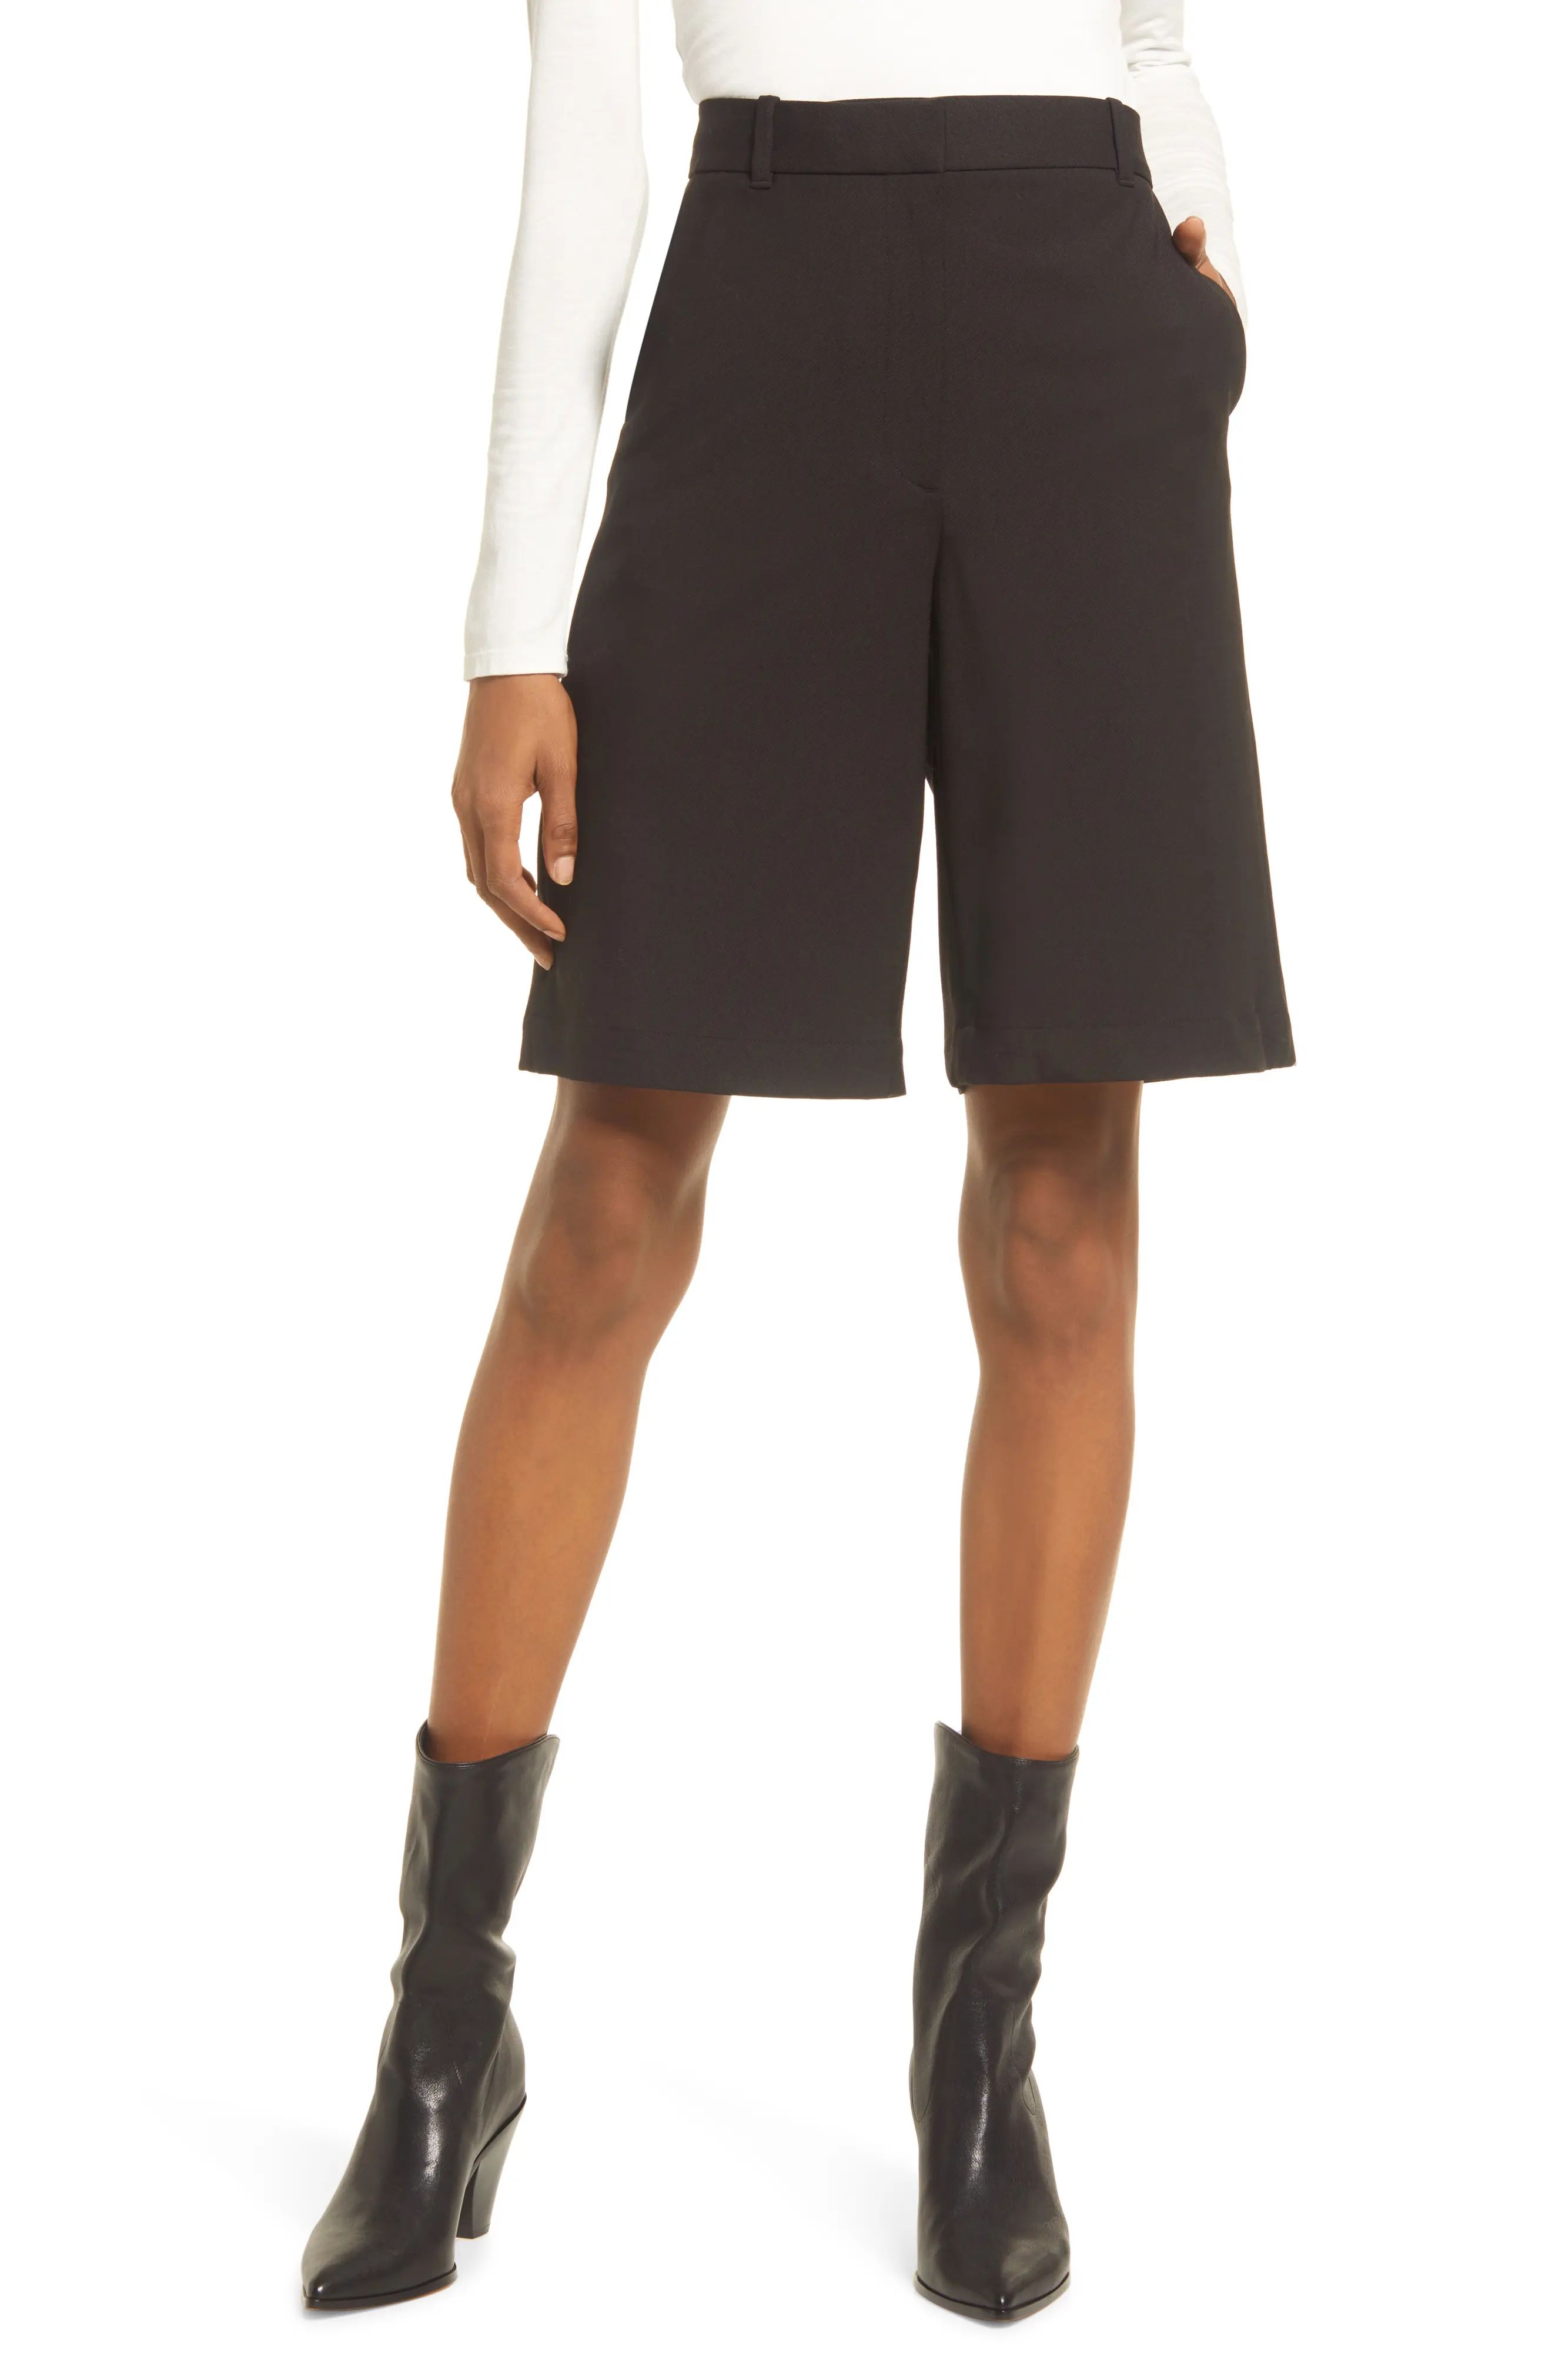 & Other Stories Winter Shorts, Size 0 in Black at Nordstrom | Nordstrom